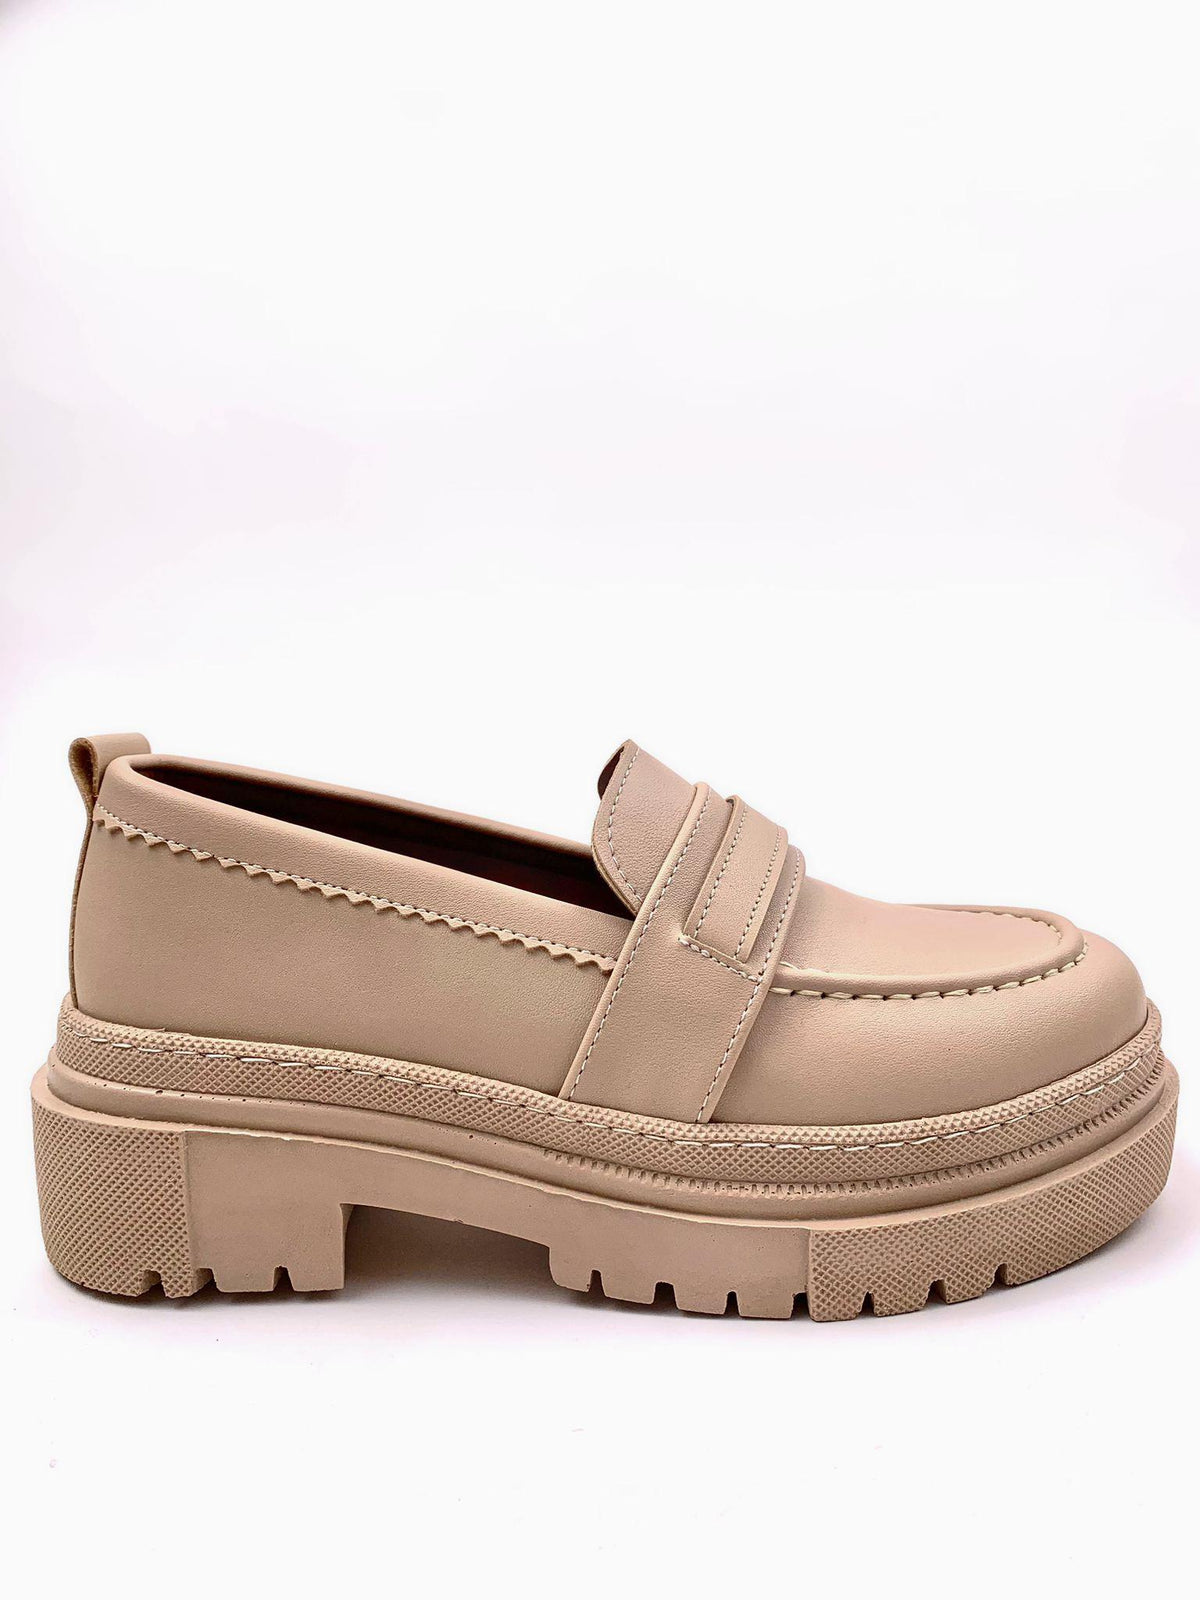 Women's Nut Poxy Skin Poly Orthopedic Comfort Sole Oxford Moccasin High Sole Shoes - STREETMODE ™